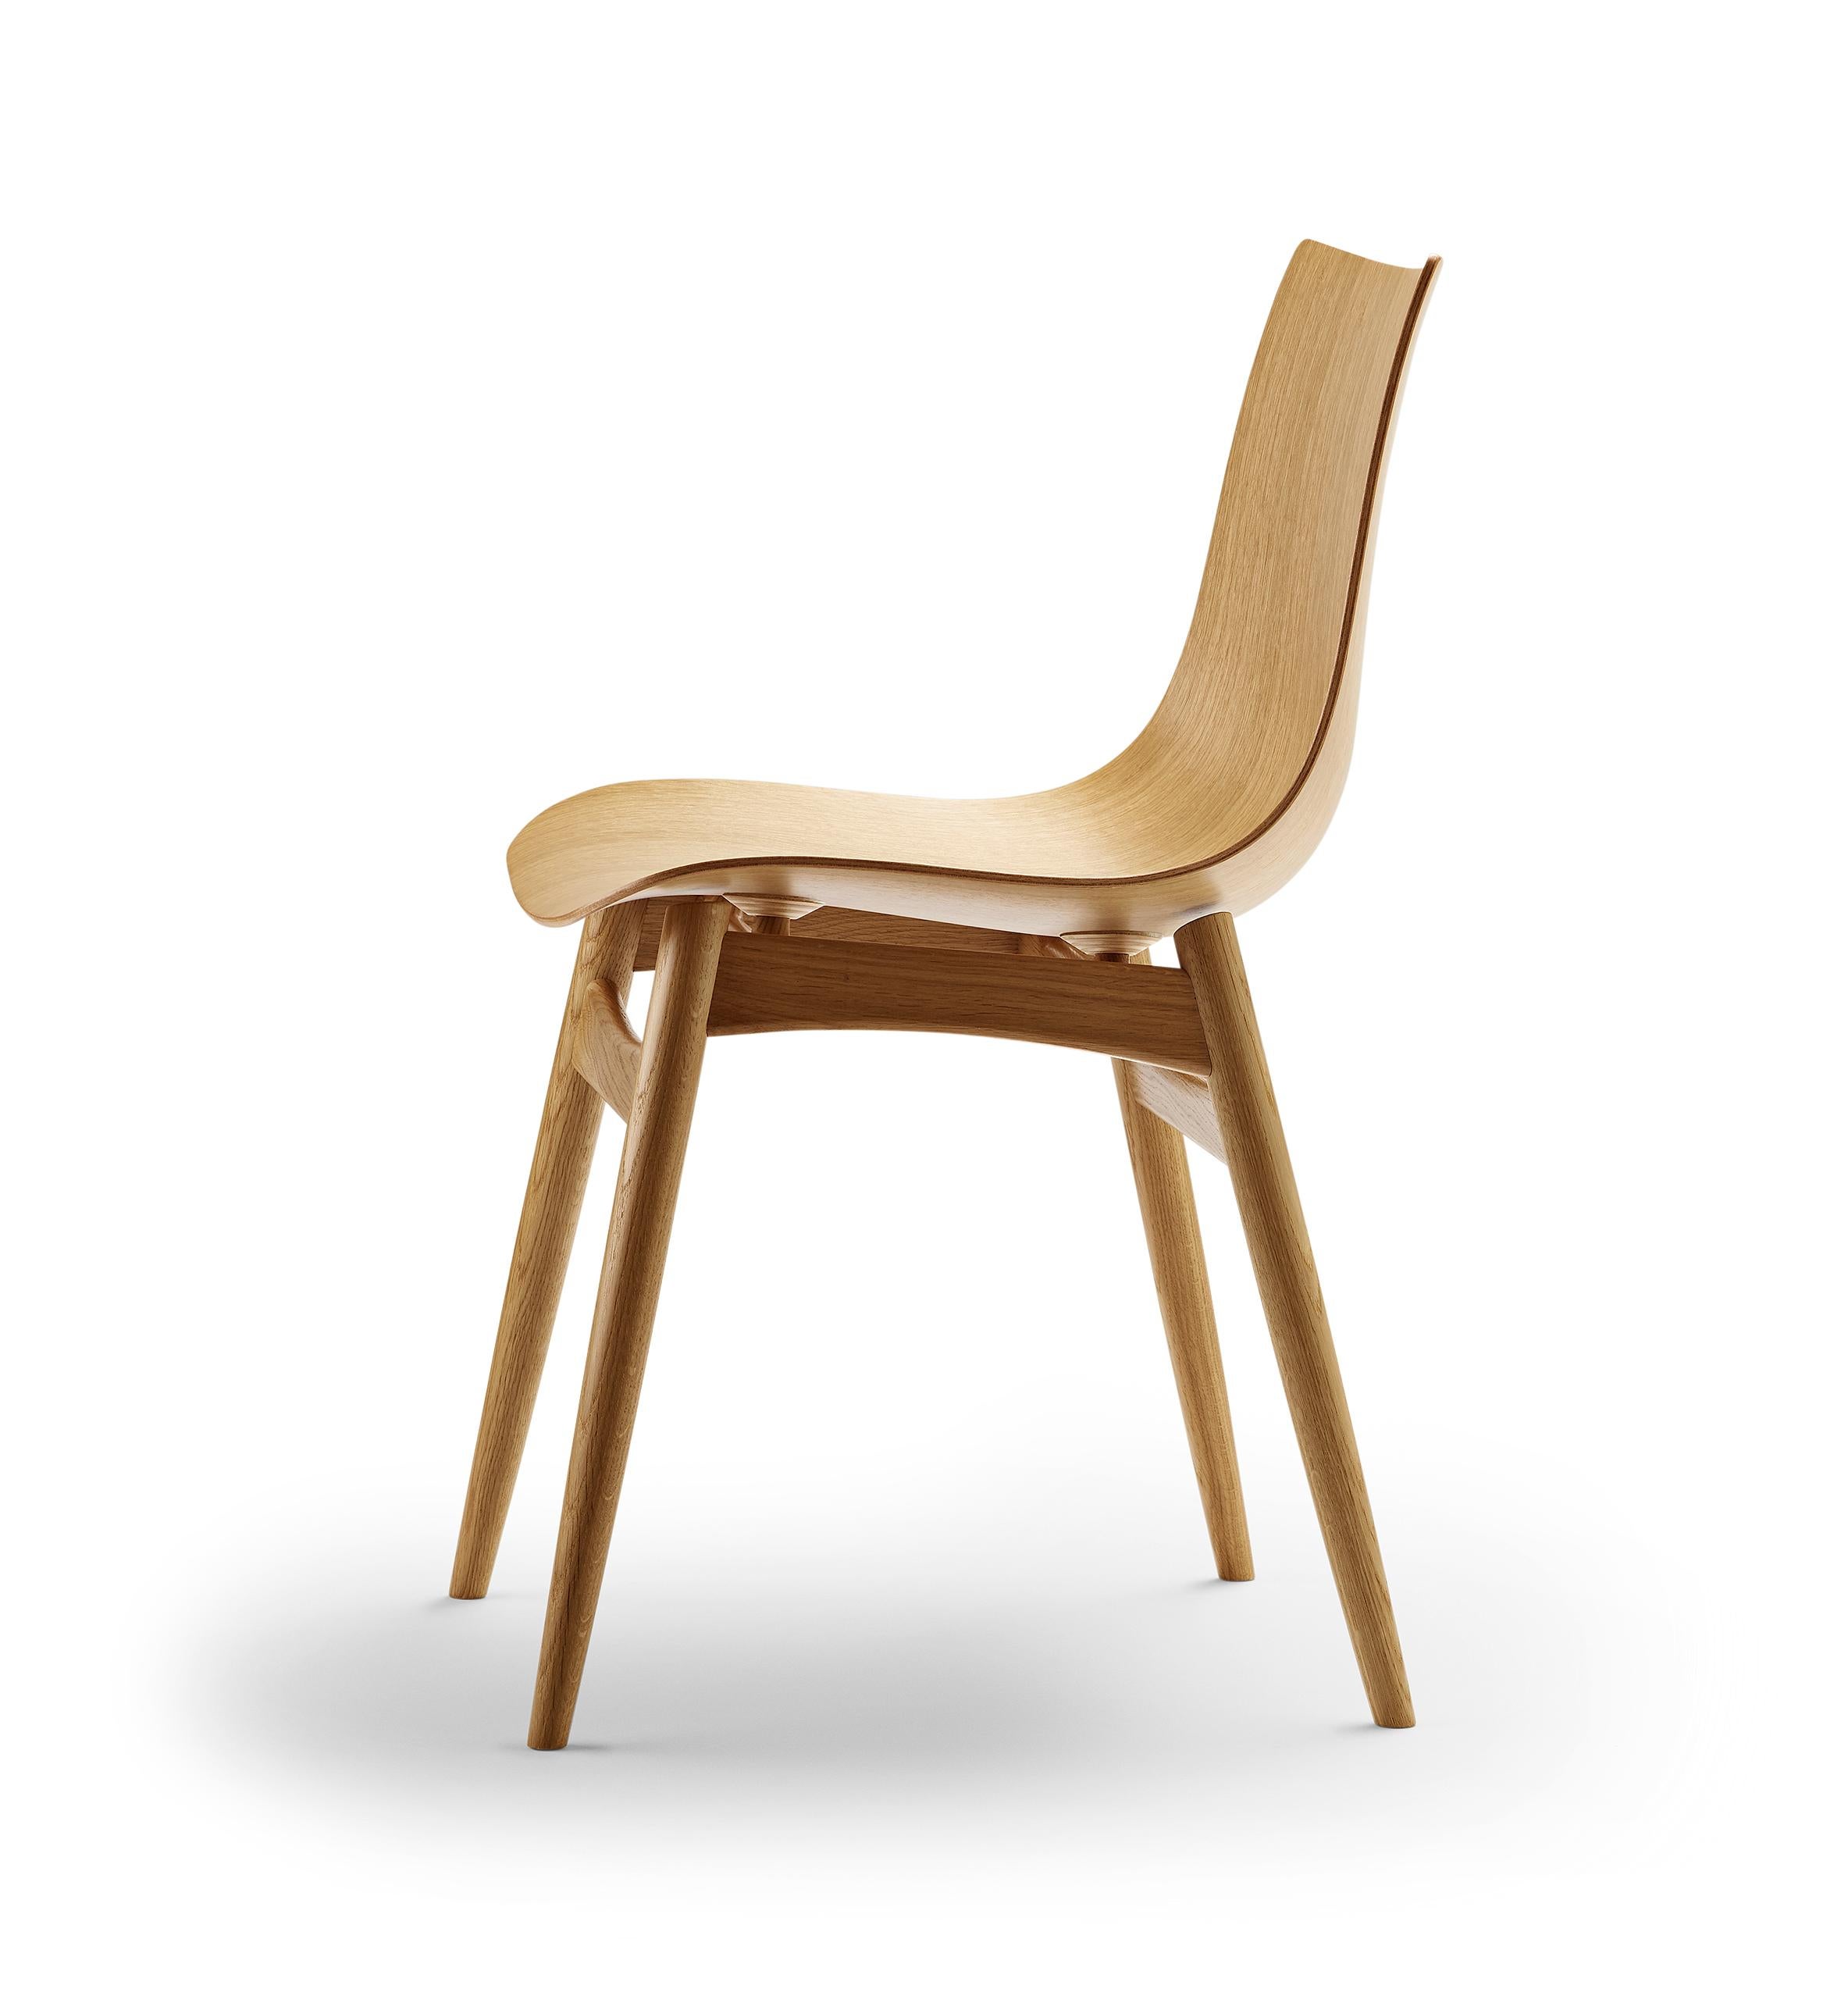 The BA001T Preludia chair by Brad Ascalon is beautifully crafted in natural materials, it is available in oak, walnut or beech with wooden legs and various finishes. The chair is part of the Preludia series that includes chairs and tables and